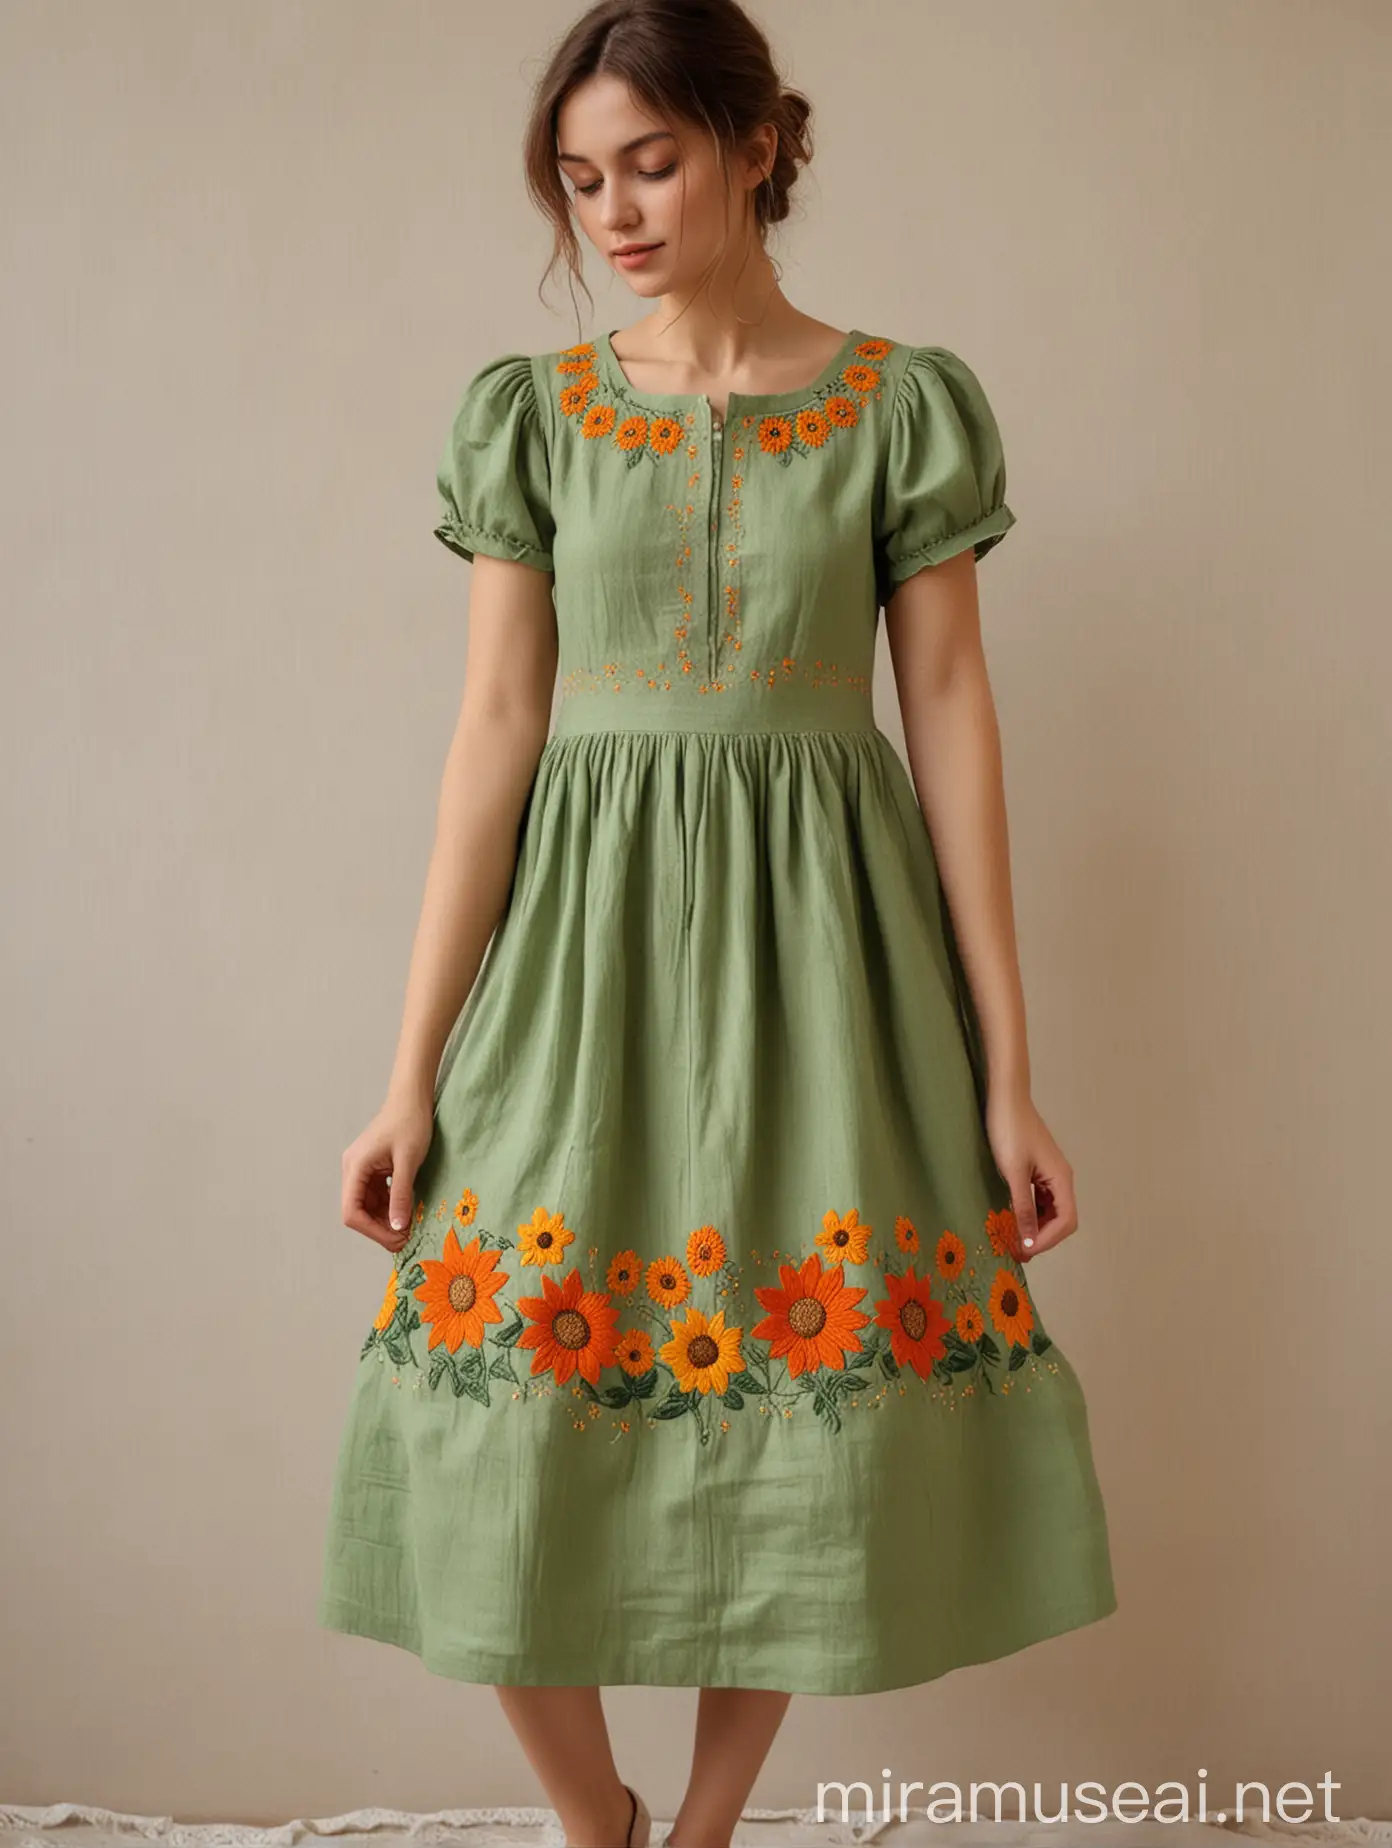 Dress
 A lady is wearing it 
 Linen fabric
 green color
 Small and tiny orange sunflower embroidery